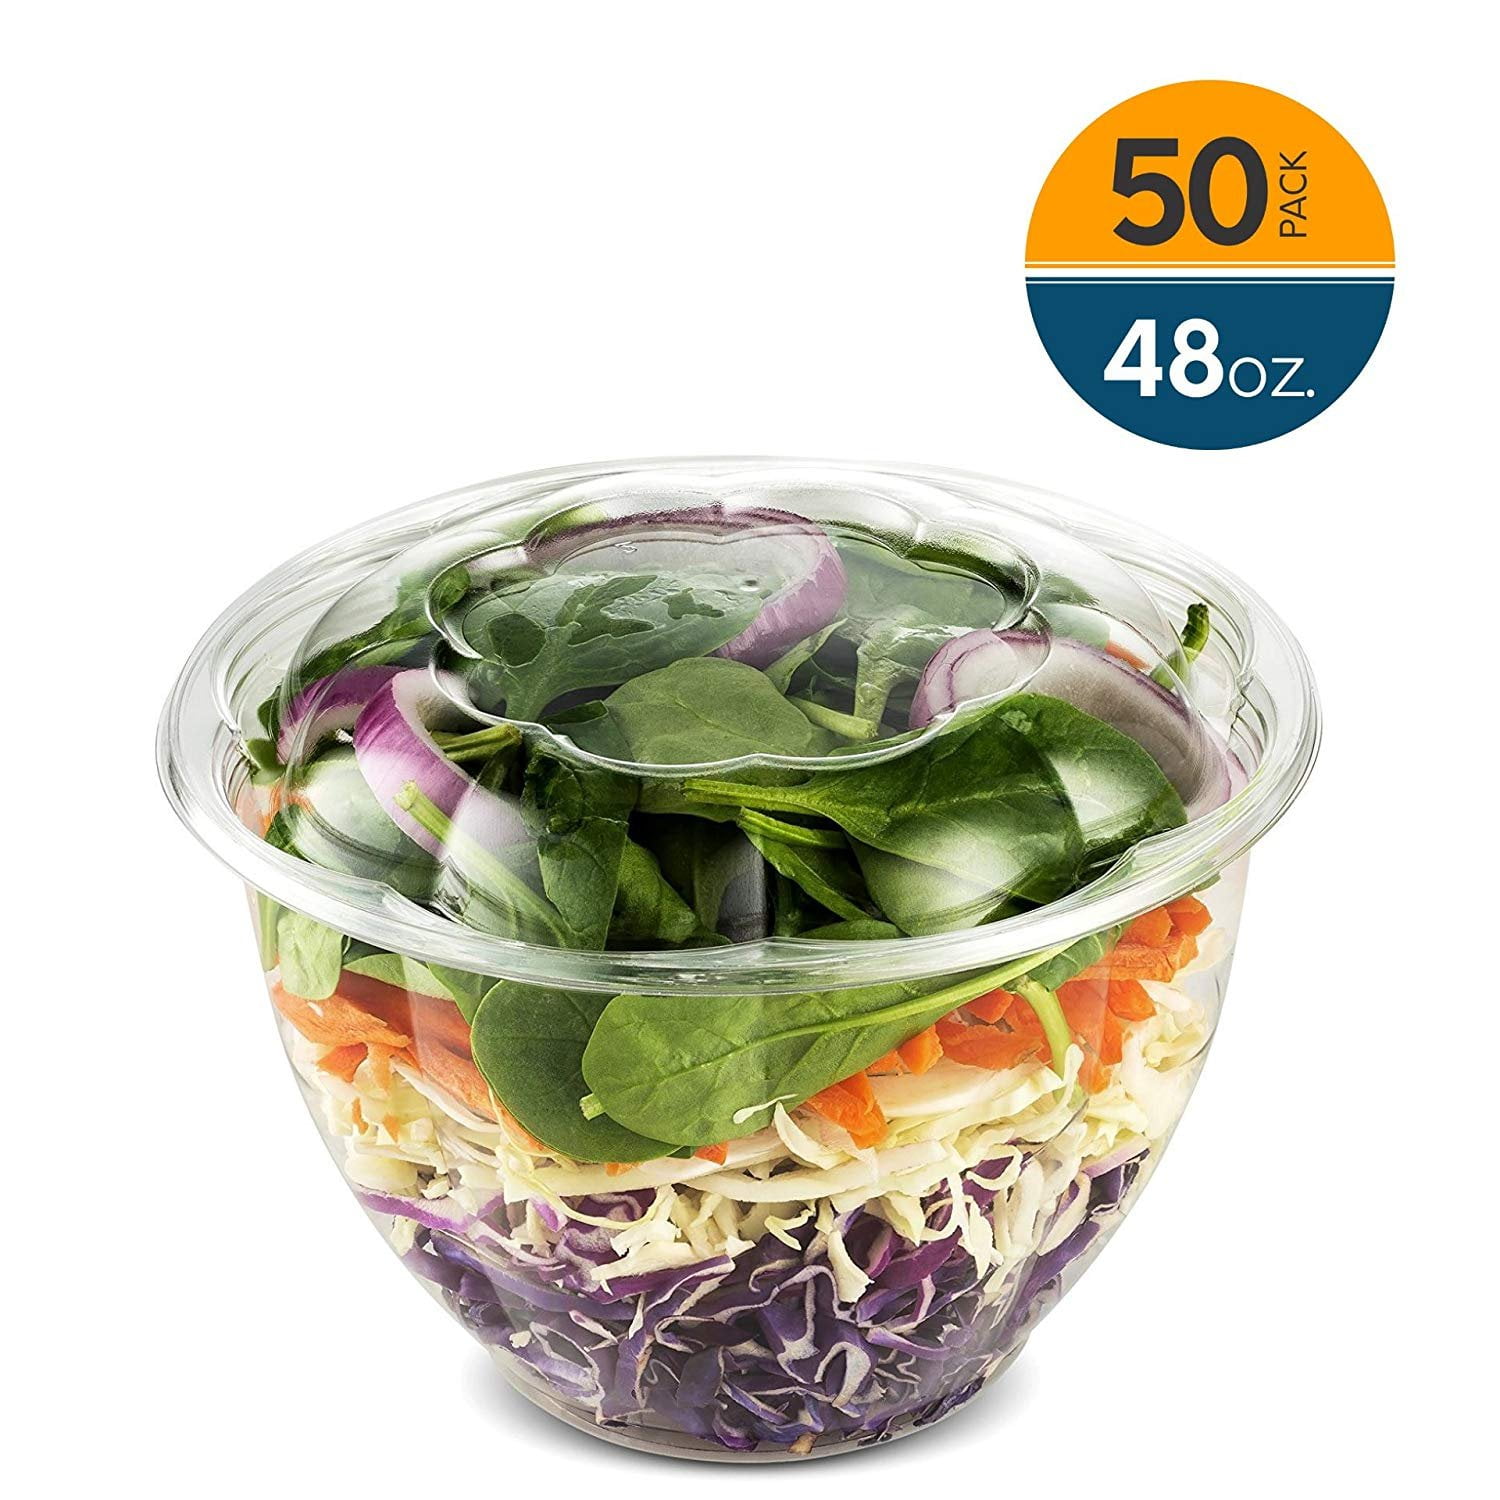 Clear Plastic Disposable Salad Containers 28oz Clear Disposable Salad Bowls with Lids 25 Count